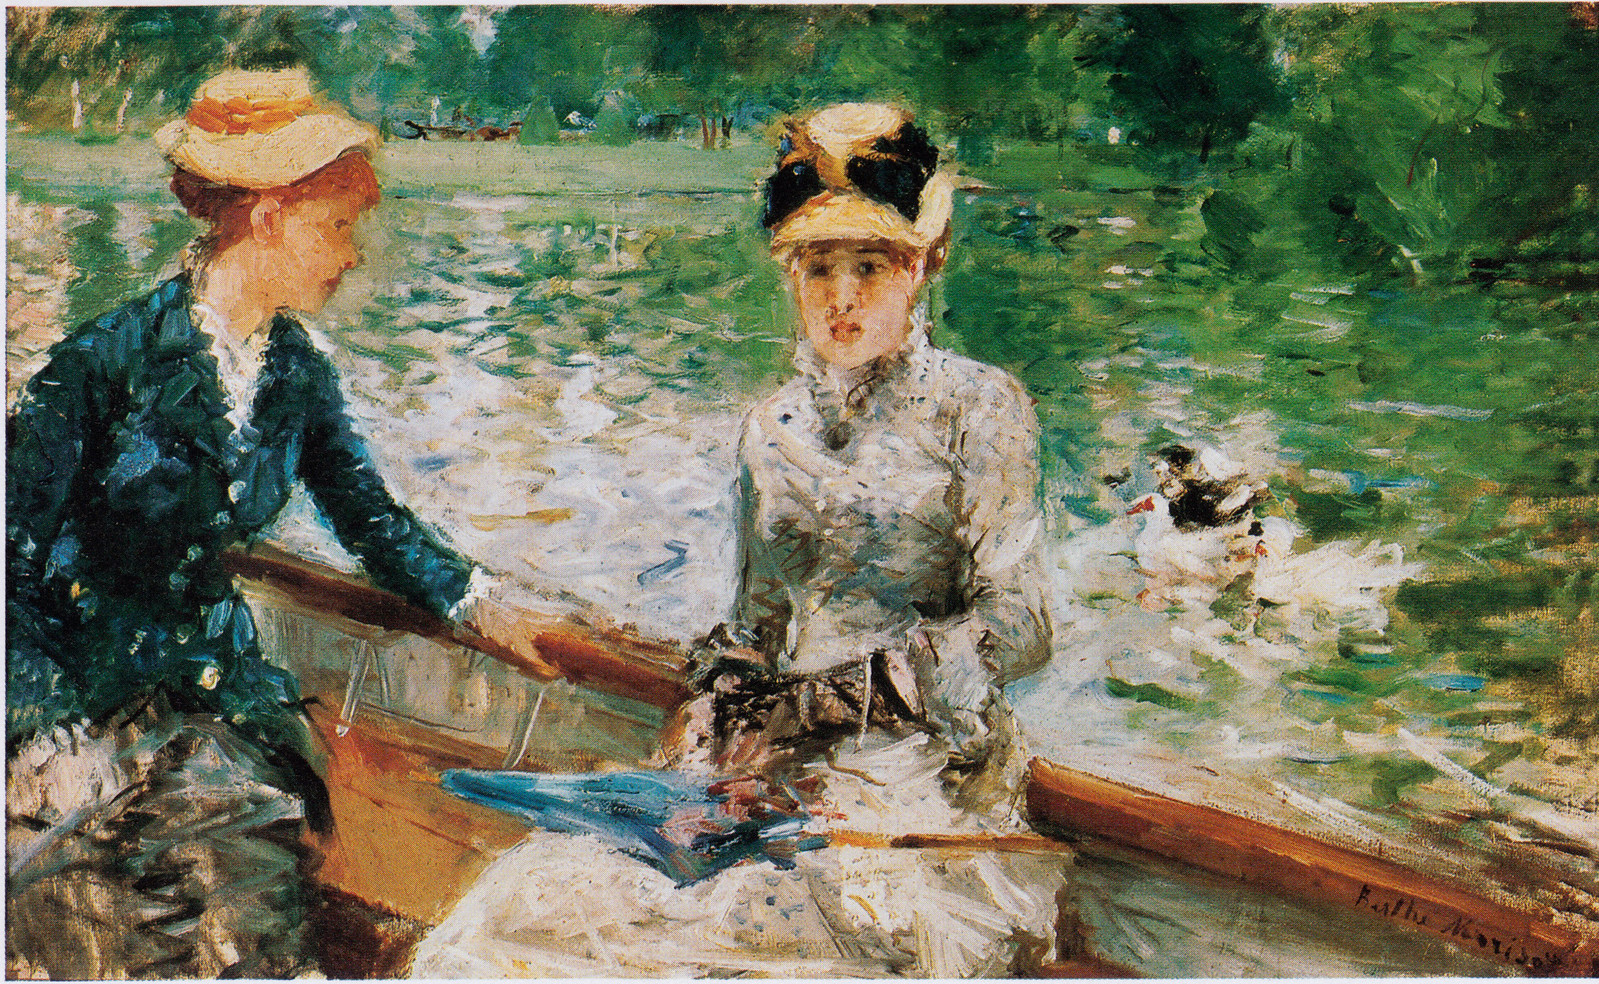 The Lake in the Bois de Boulogne by Berthe Morisot, 1879